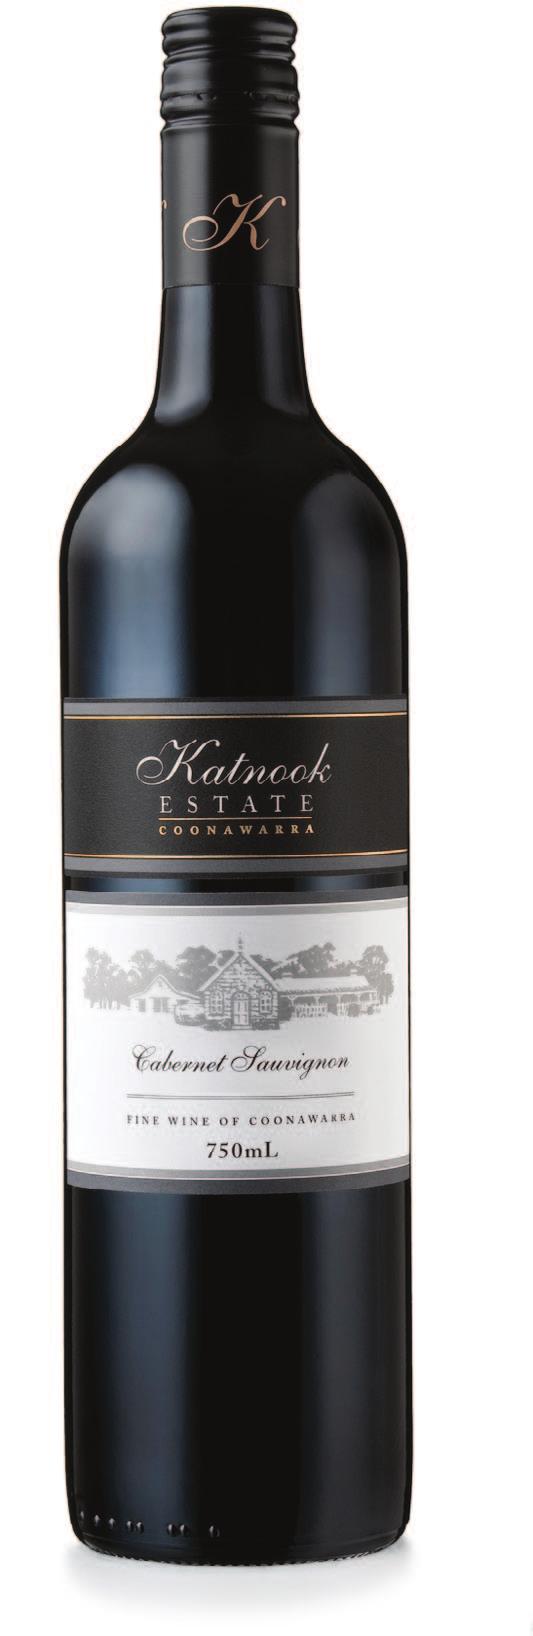 Cabernet Sauvignon 2008 Steeped in heritage and tradition, the Estate s flagship range continues to be recognised and awarded both locally and internationally for the exceptional hallmark quality and